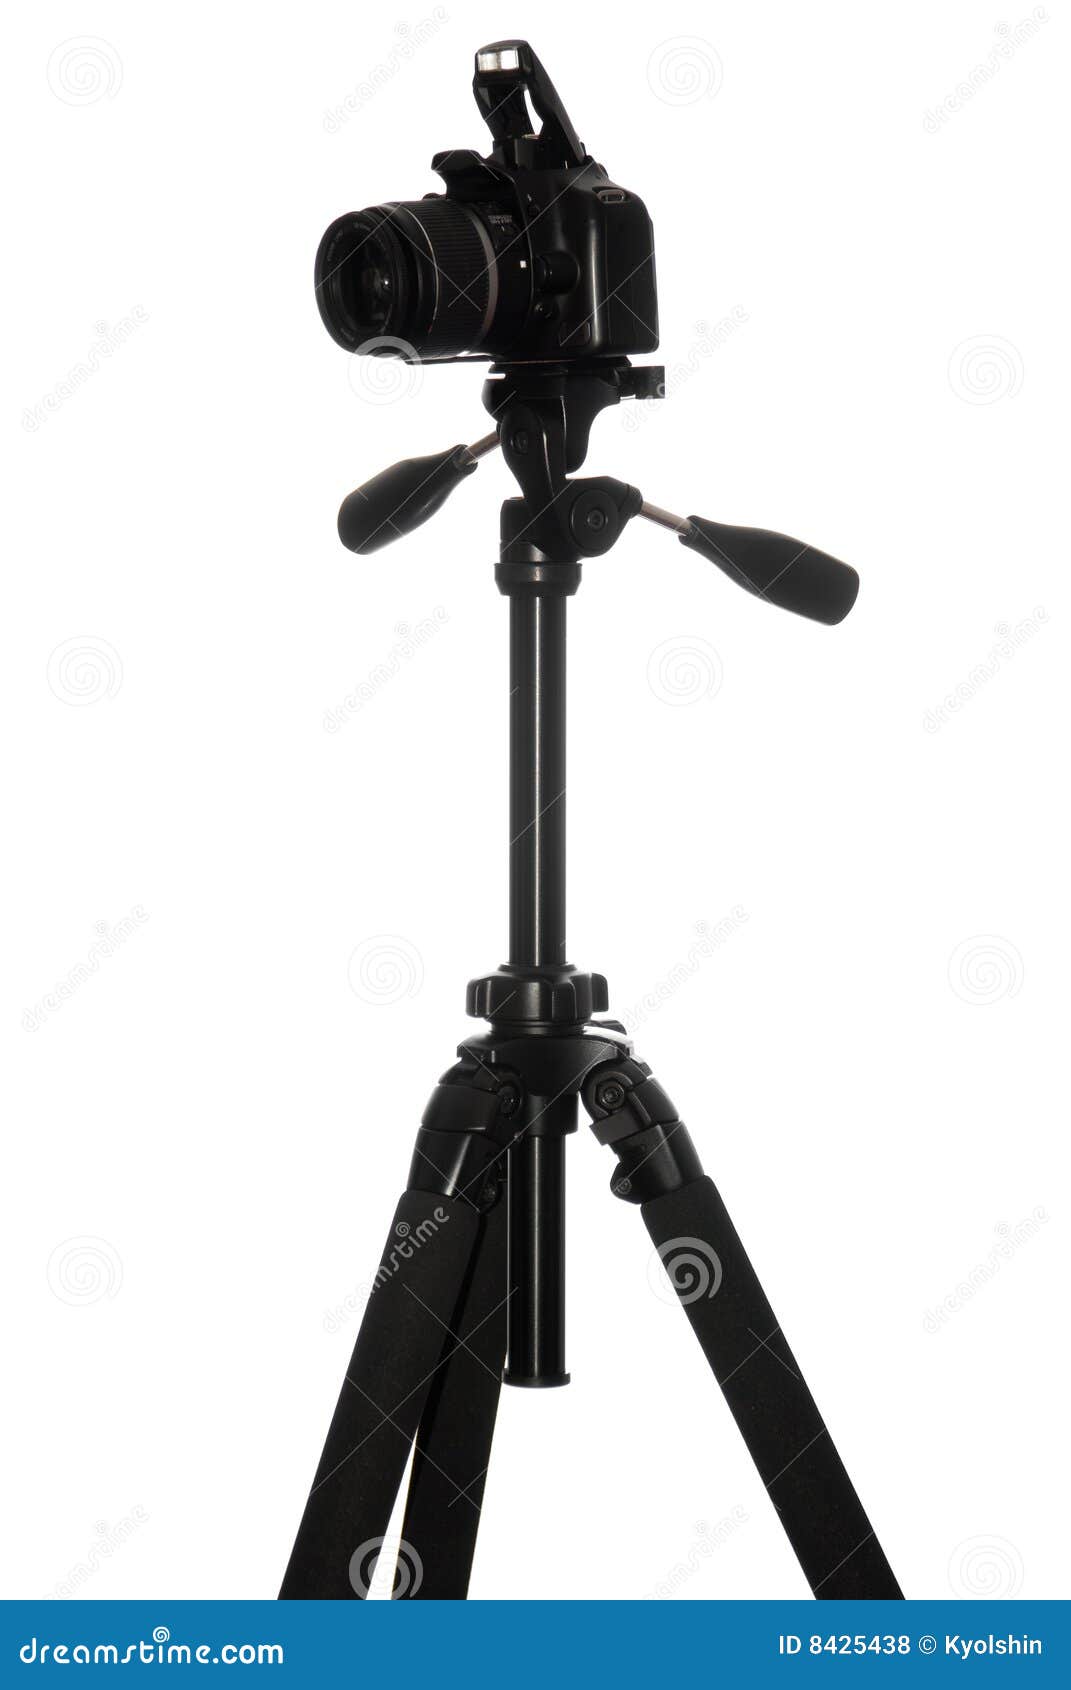 camera stand clipart - photo #6